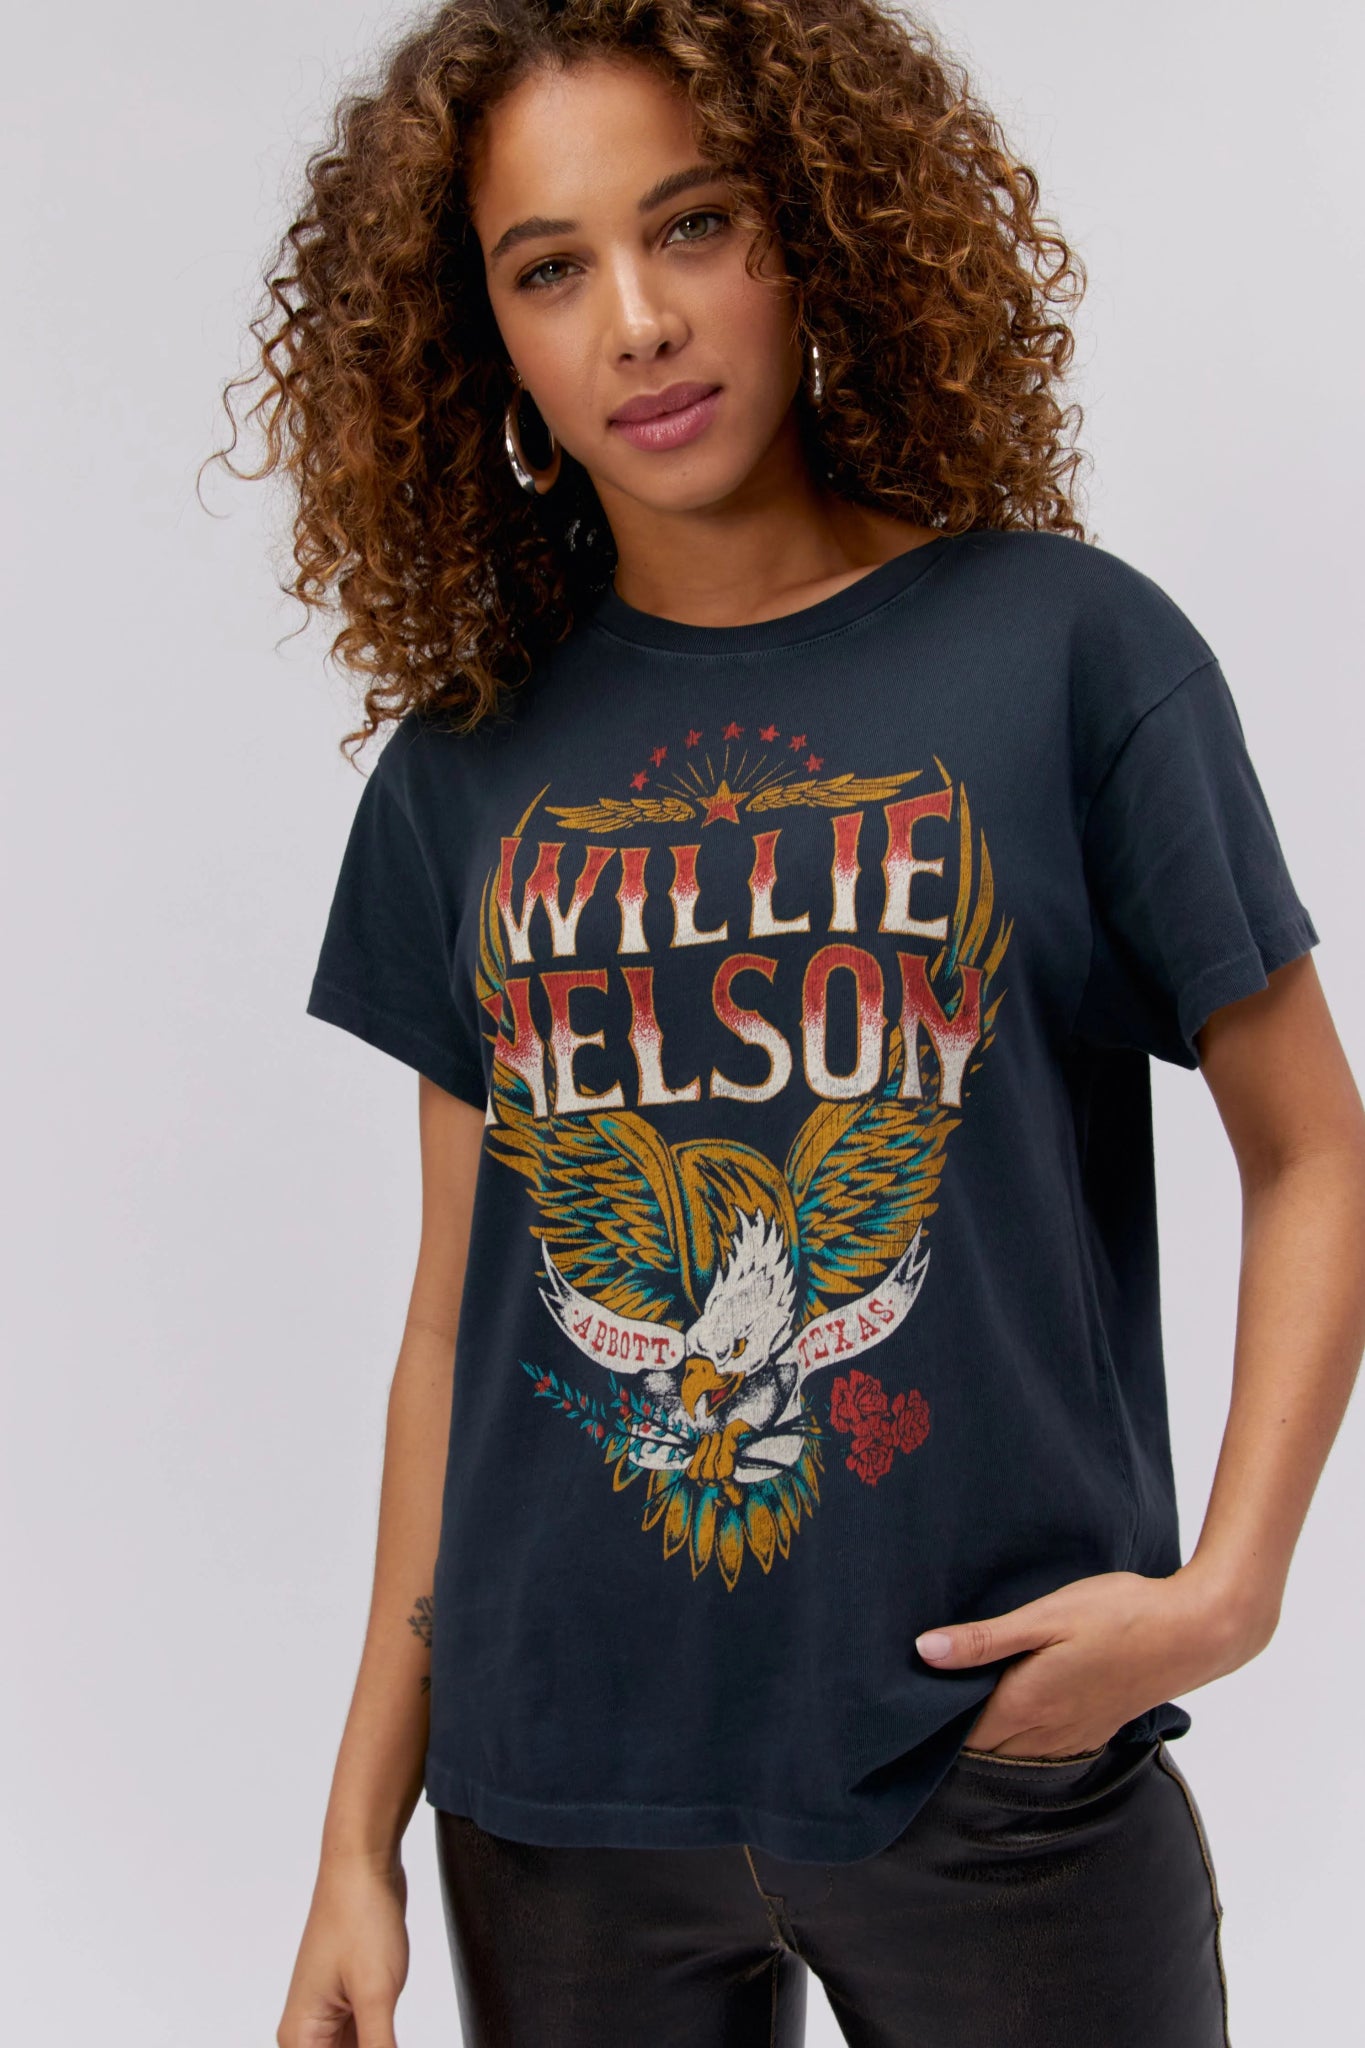 Daydreamer Graphic Tee | Willie Nelson Texas | Tour Tee - Women's Shirts & Tops - Blooming Daily